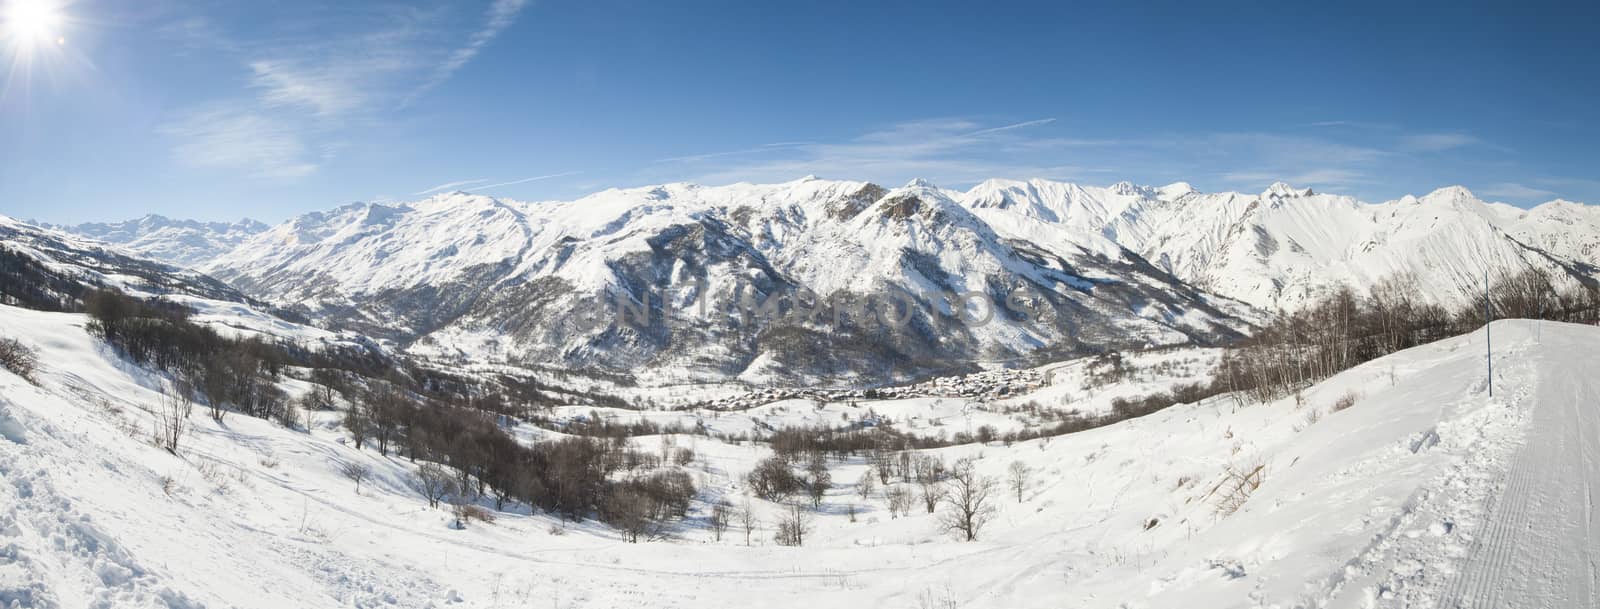 Panoramic view of a snow covered mountain range in the alps looking down valley